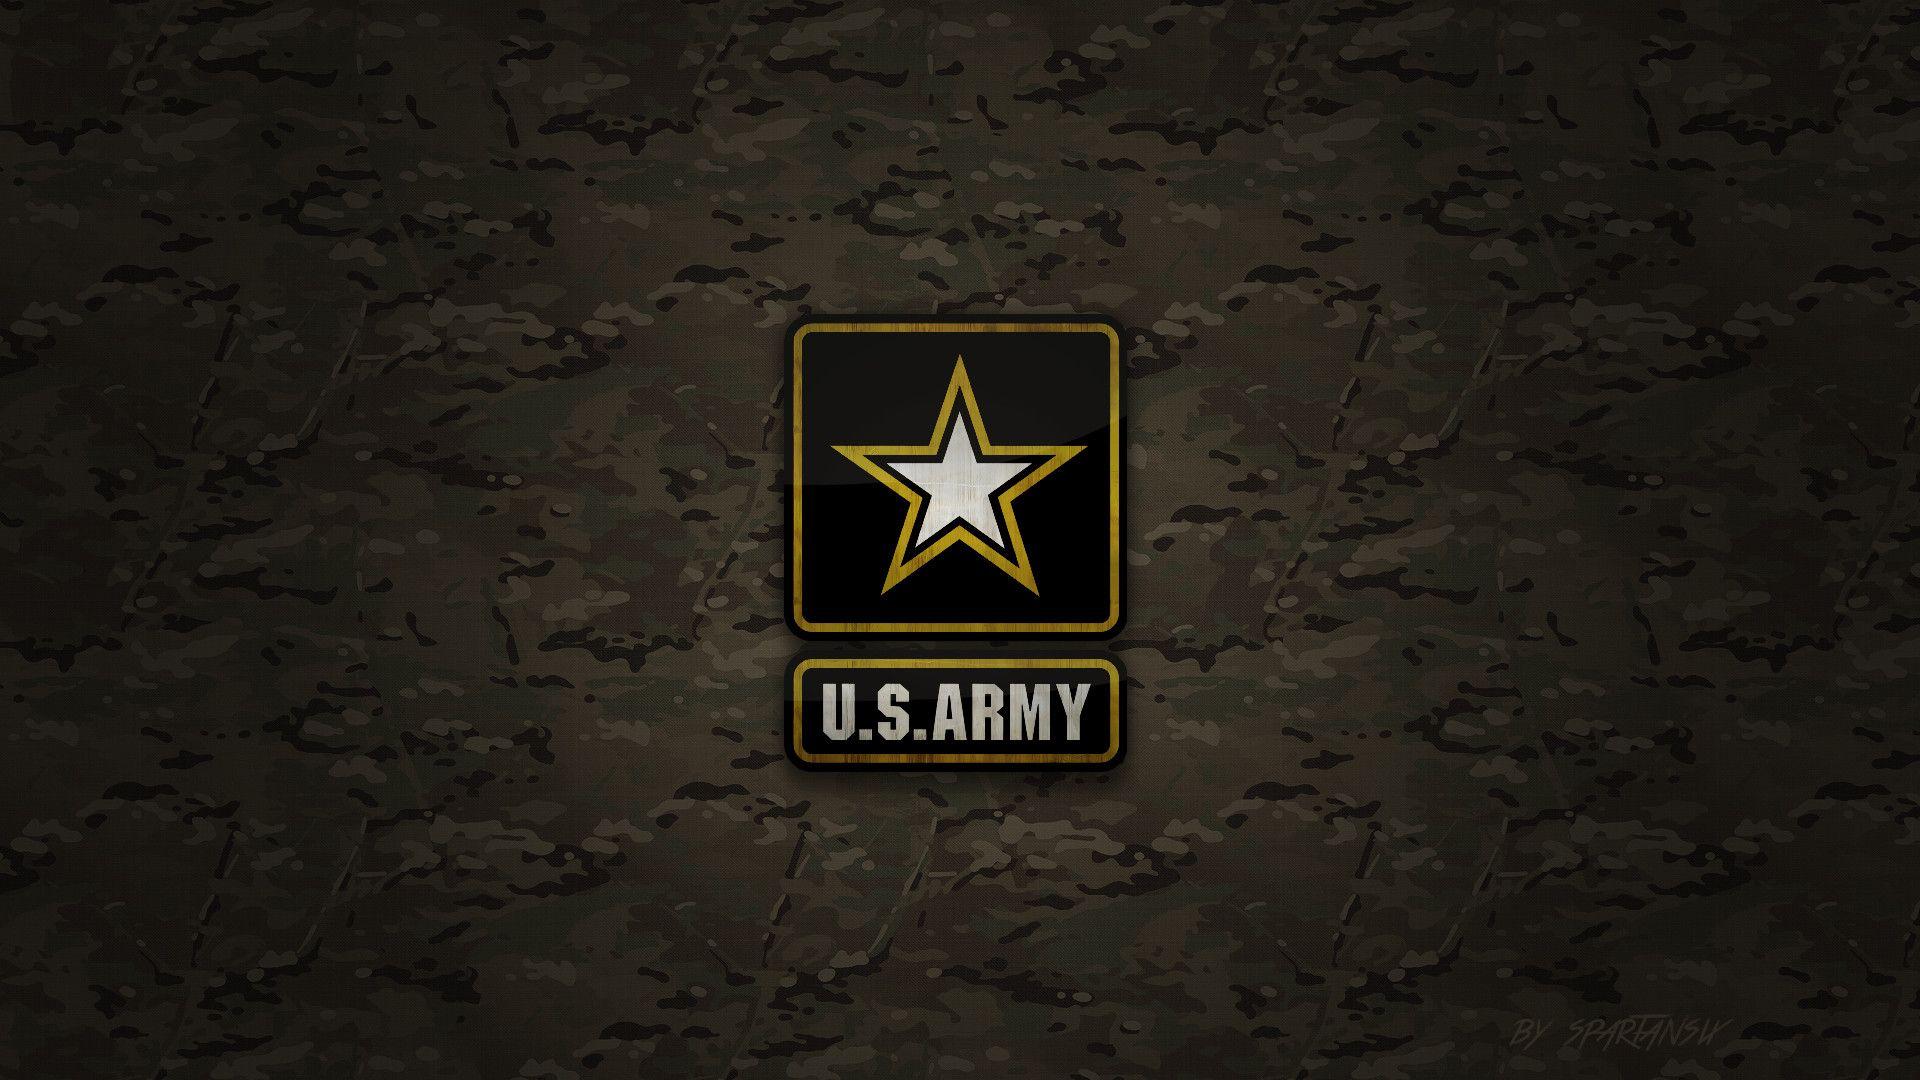 go army wallpapers